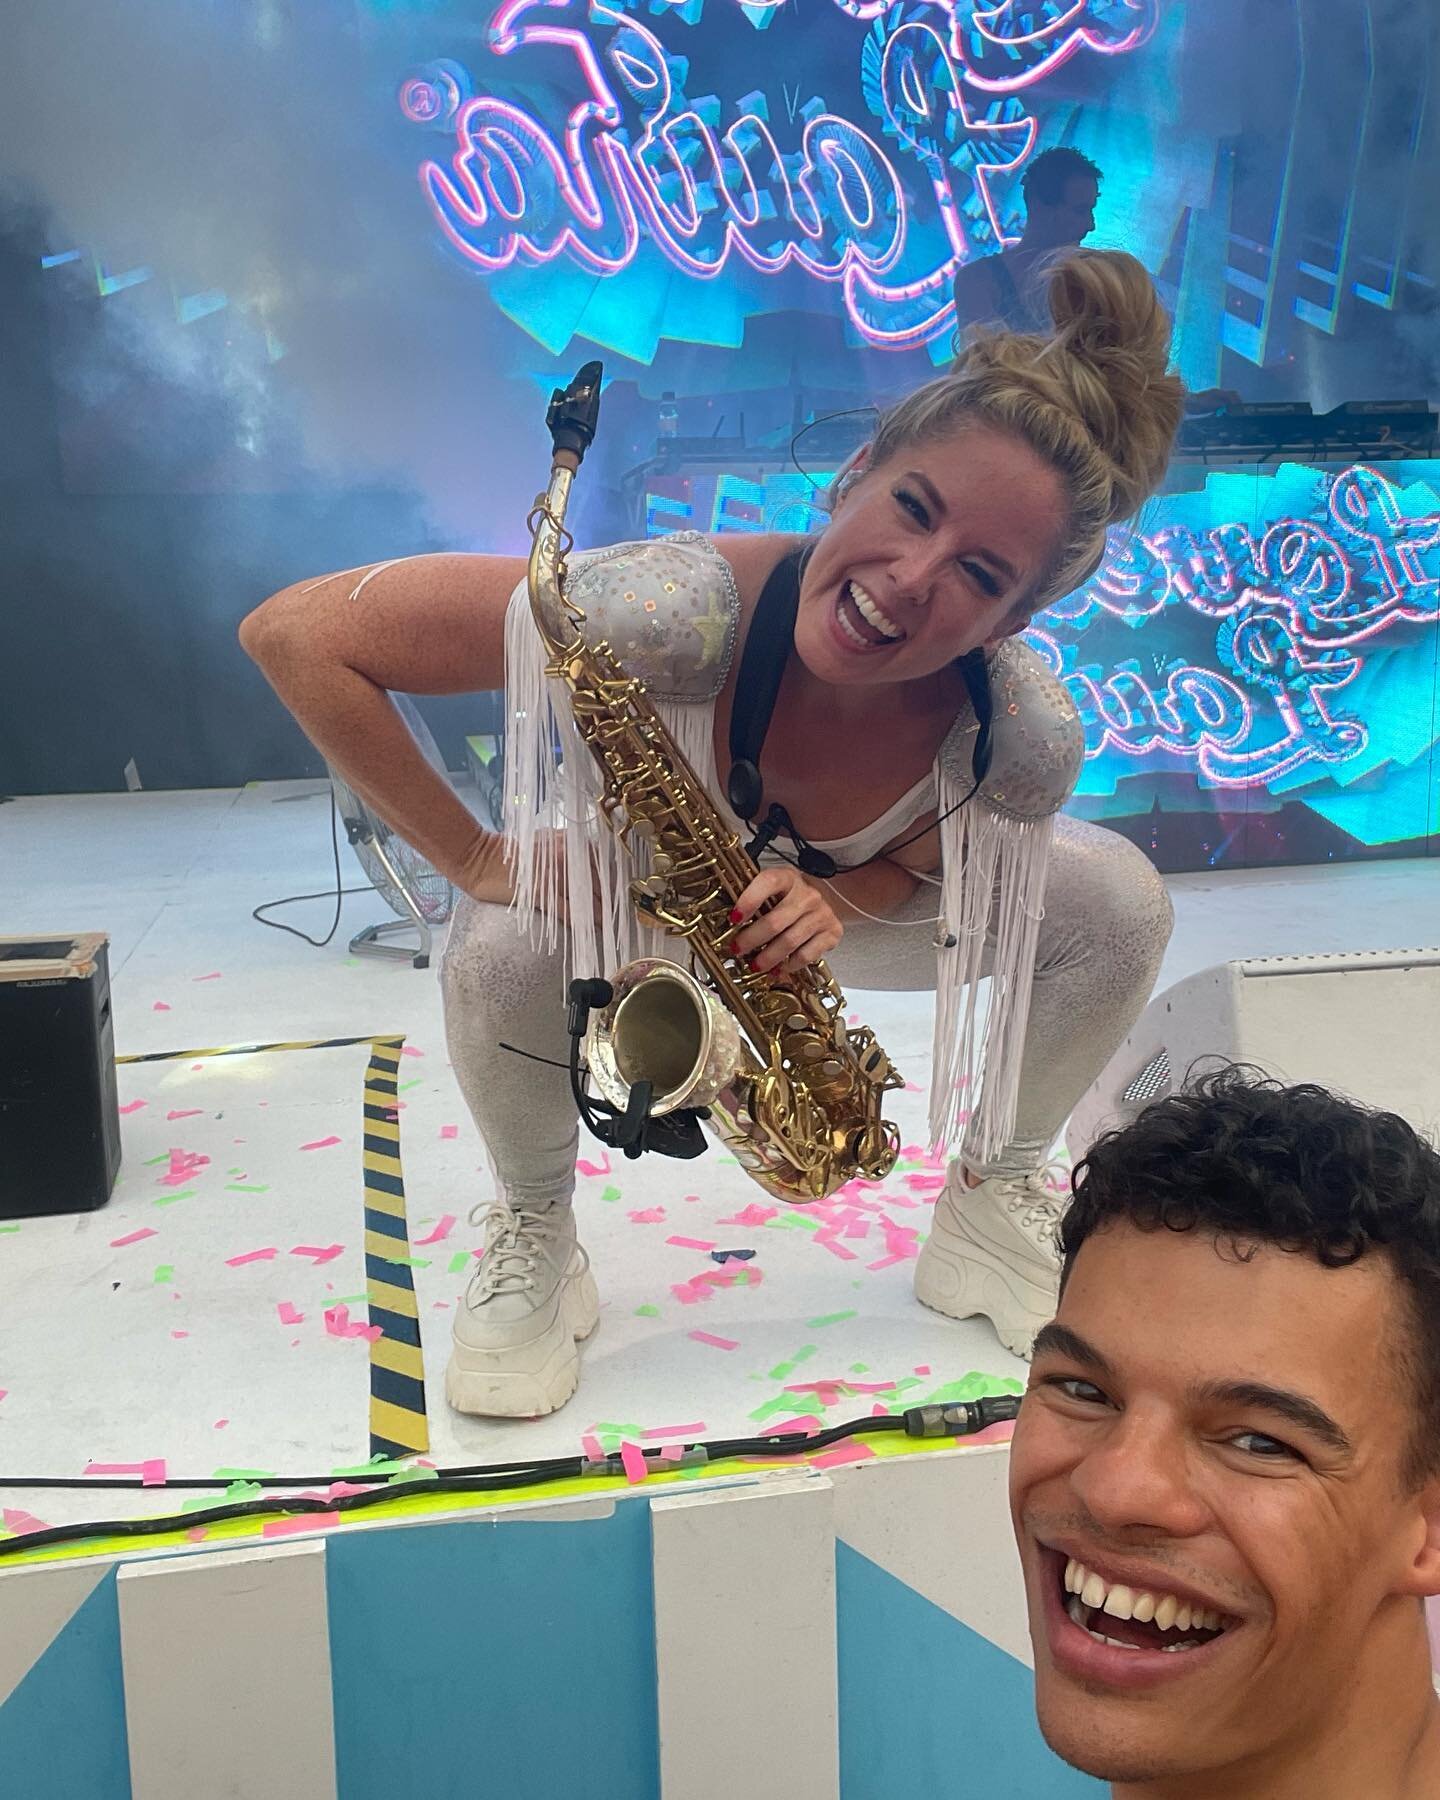 Well, that was one of the most incredible experiences of my life. There were moments throughout @lovelylaurasax and @djbensantiago set that I cried. It&rsquo;s truly a memory I will hold and cherish forever. 
#lovelylaura #sax #dj #bensantiago #ibiza